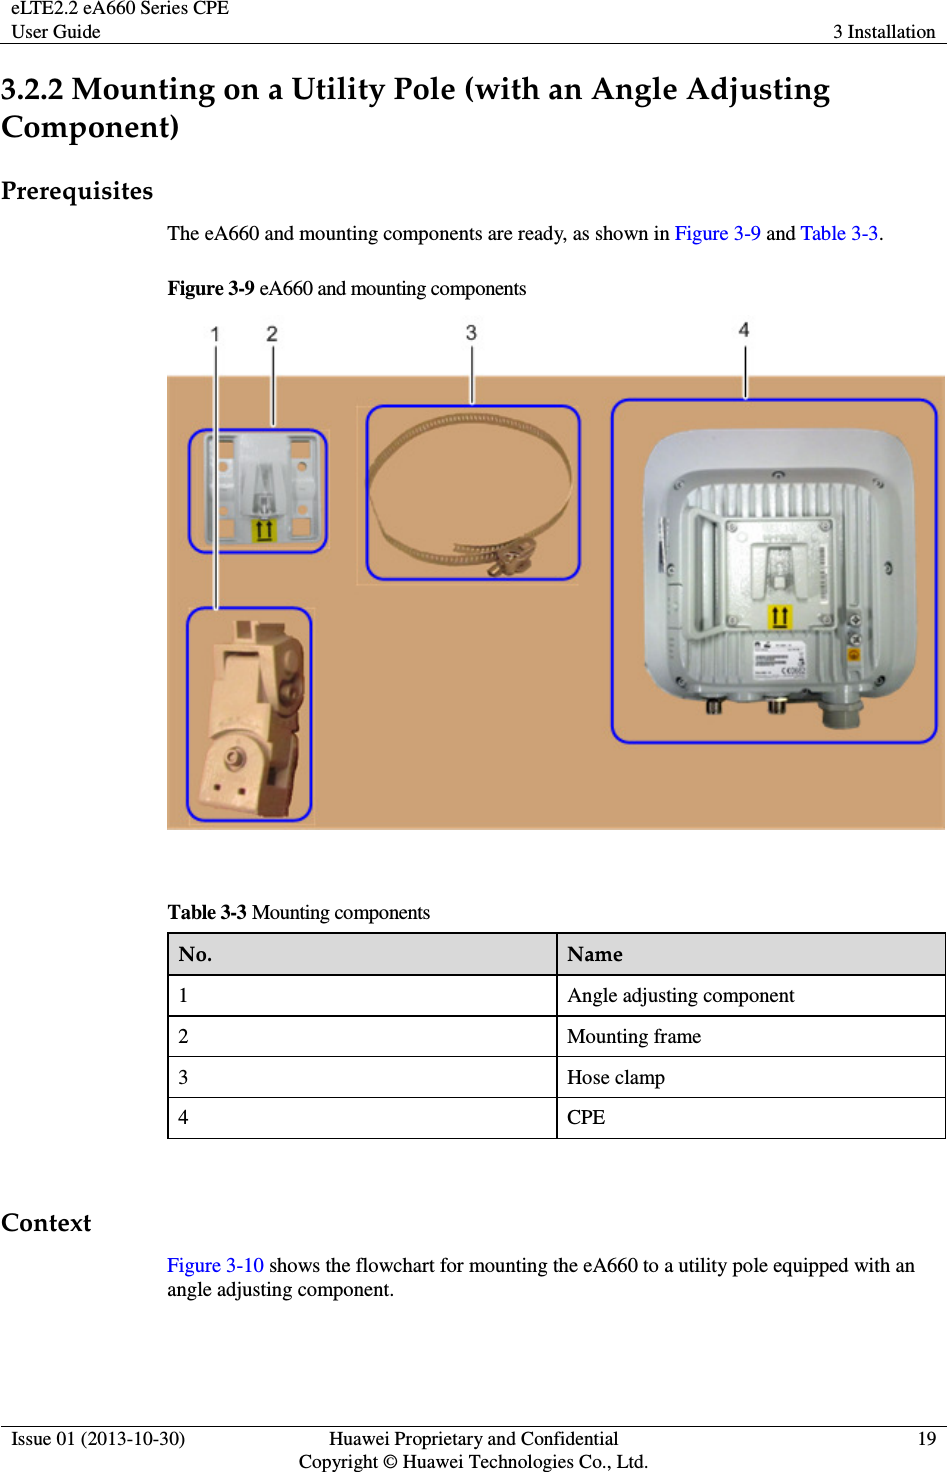 eLTE2.2 eA660 Series CPE User Guide  3 Installation  Issue 01 (2013-10-30)  Huawei Proprietary and Confidential                                     Copyright © Huawei Technologies Co., Ltd. 19  3.2.2 Mounting on a Utility Pole (with an Angle Adjusting Component) Prerequisites The eA660 and mounting components are ready, as shown in Figure 3-9 and Table 3-3. Figure 3-9 eA660 and mounting components   Table 3-3 Mounting components No.  Name 1  Angle adjusting component 2  Mounting frame 3  Hose clamp 4  CPE  Context Figure 3-10 shows the flowchart for mounting the eA660 to a utility pole equipped with an angle adjusting component. 